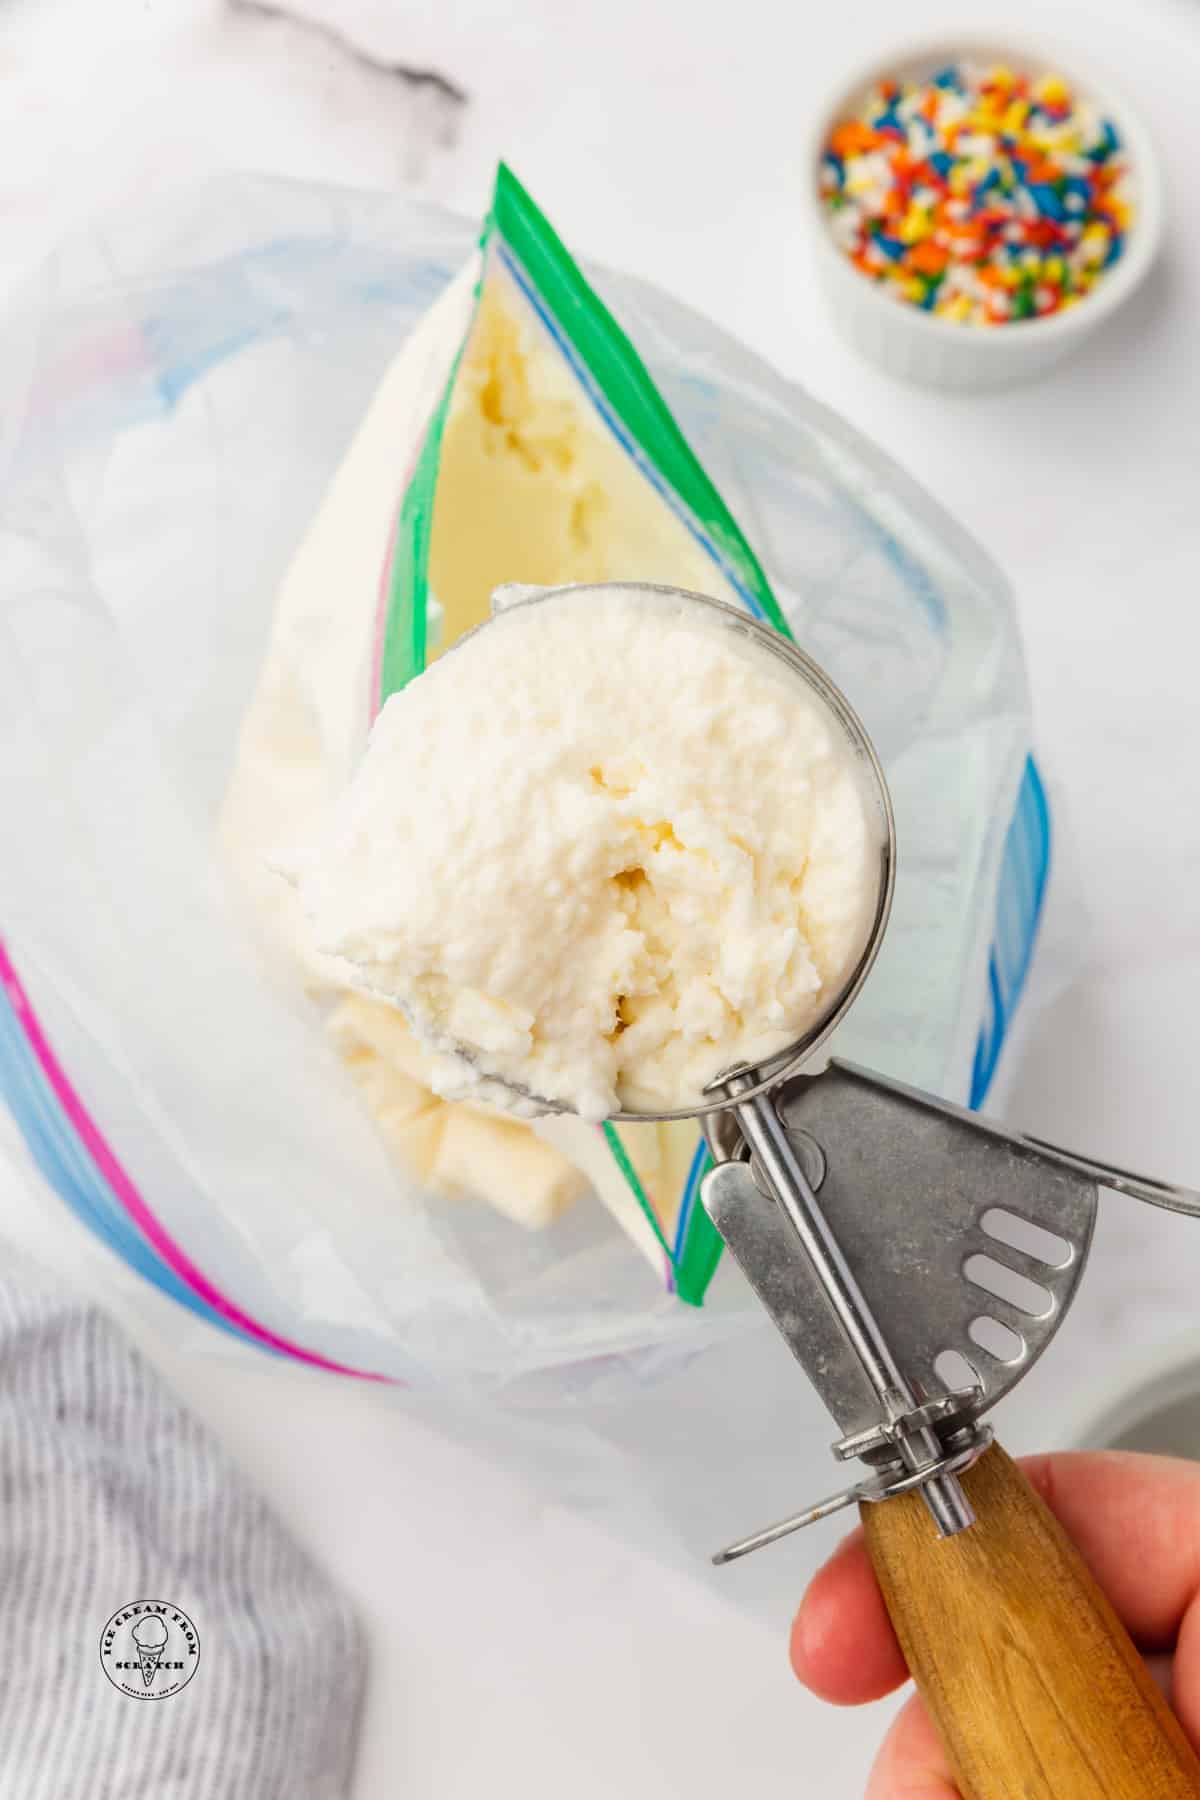 Vanilla ice cream in a metal ice cream scoop, above a double zip log bag ice cream making set up. A bowl of rainbow sprinkles is in the background.